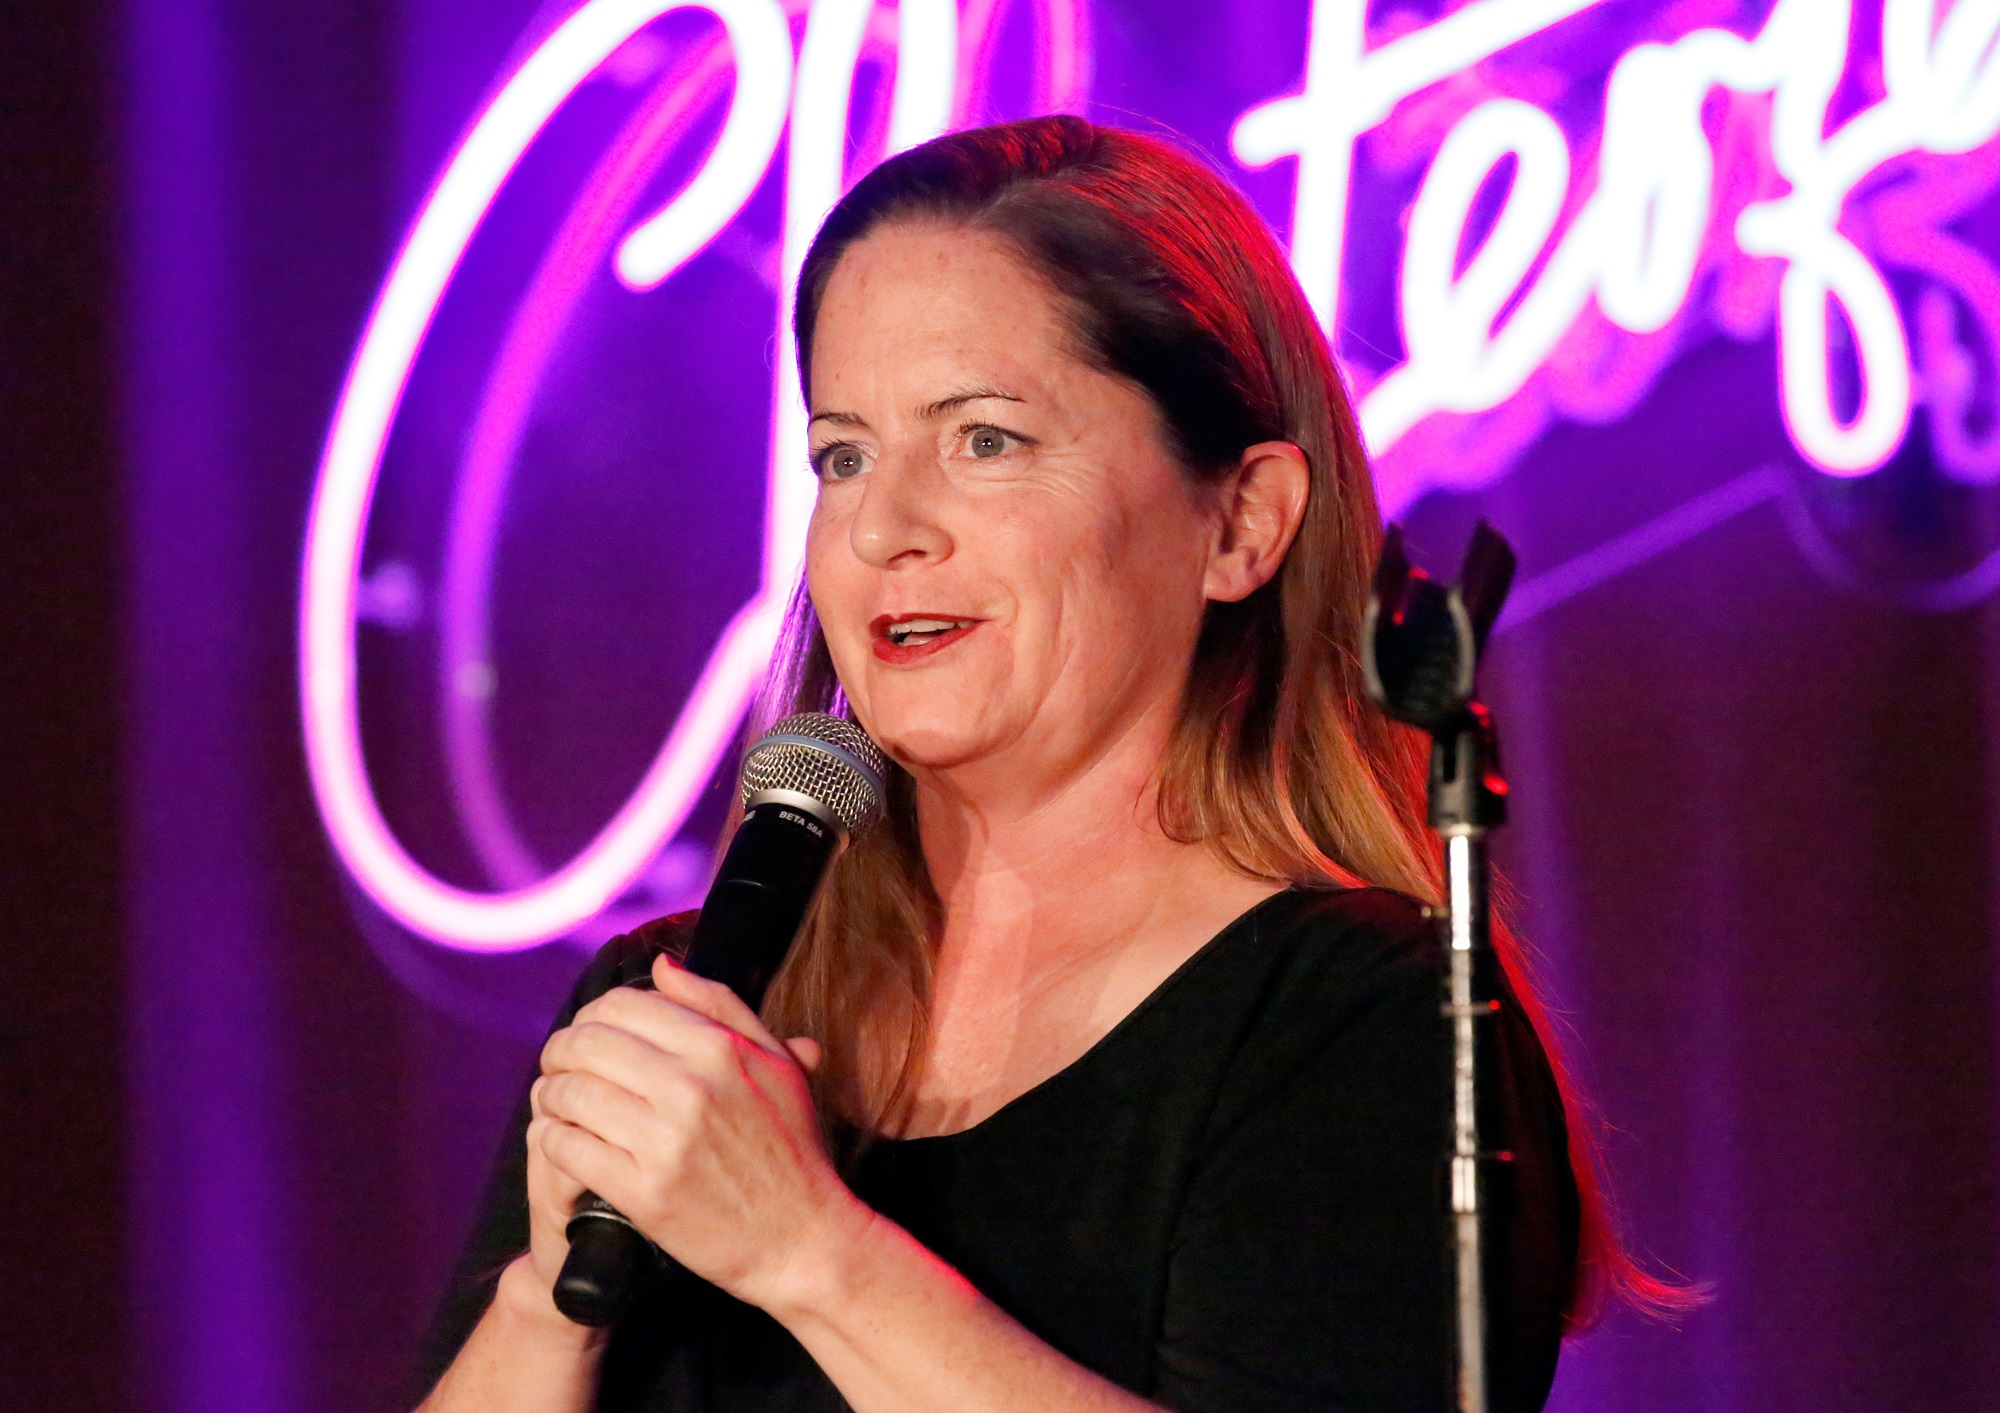 Martha Kelly performs onstage at Room 415 Comedy Club